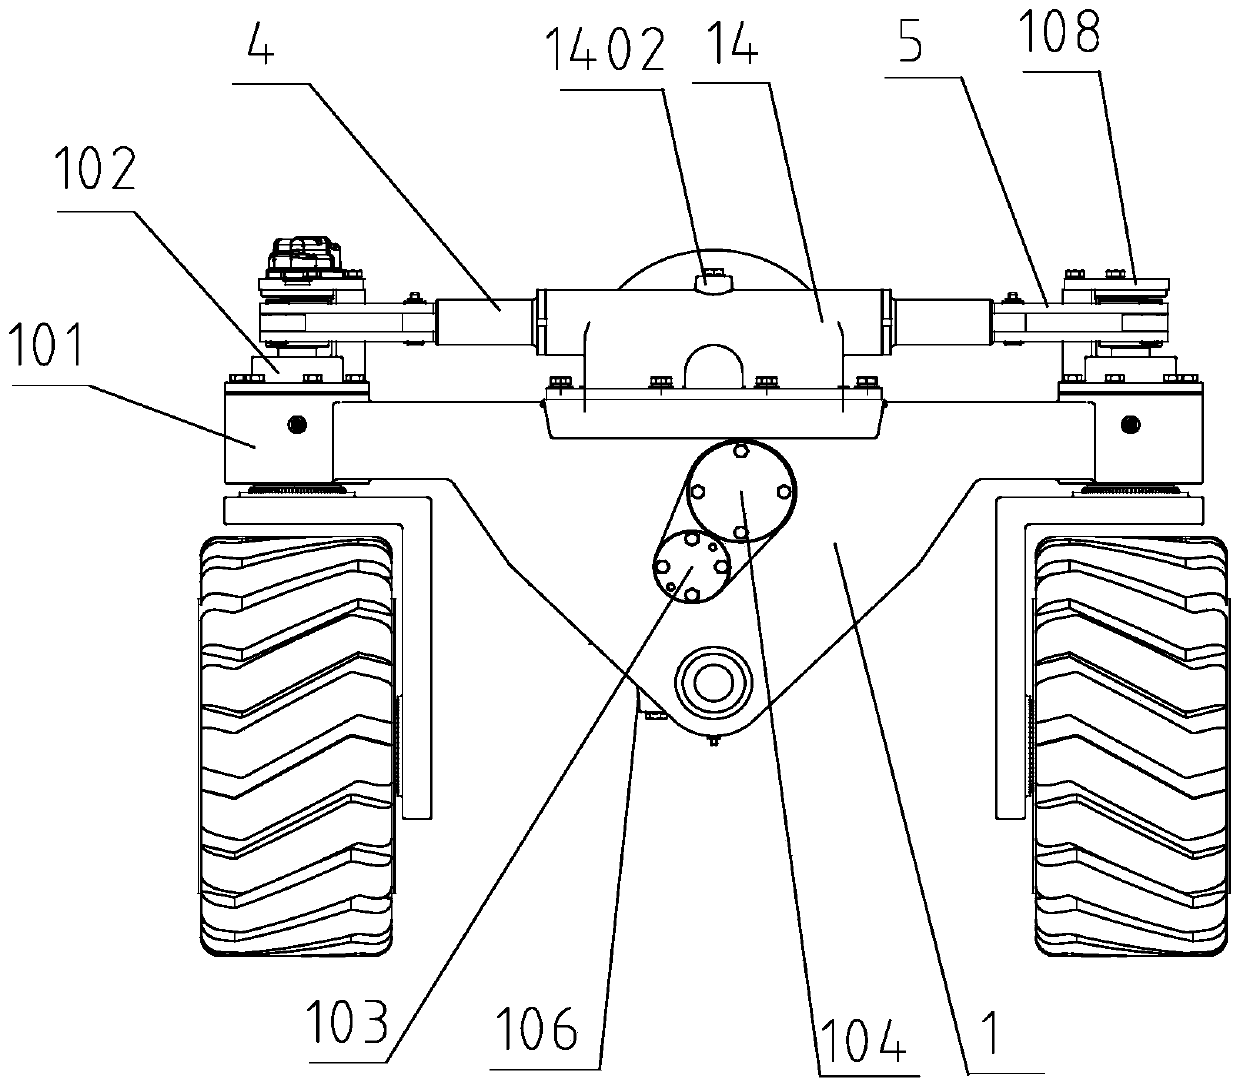 Forklift steering axle and forklift